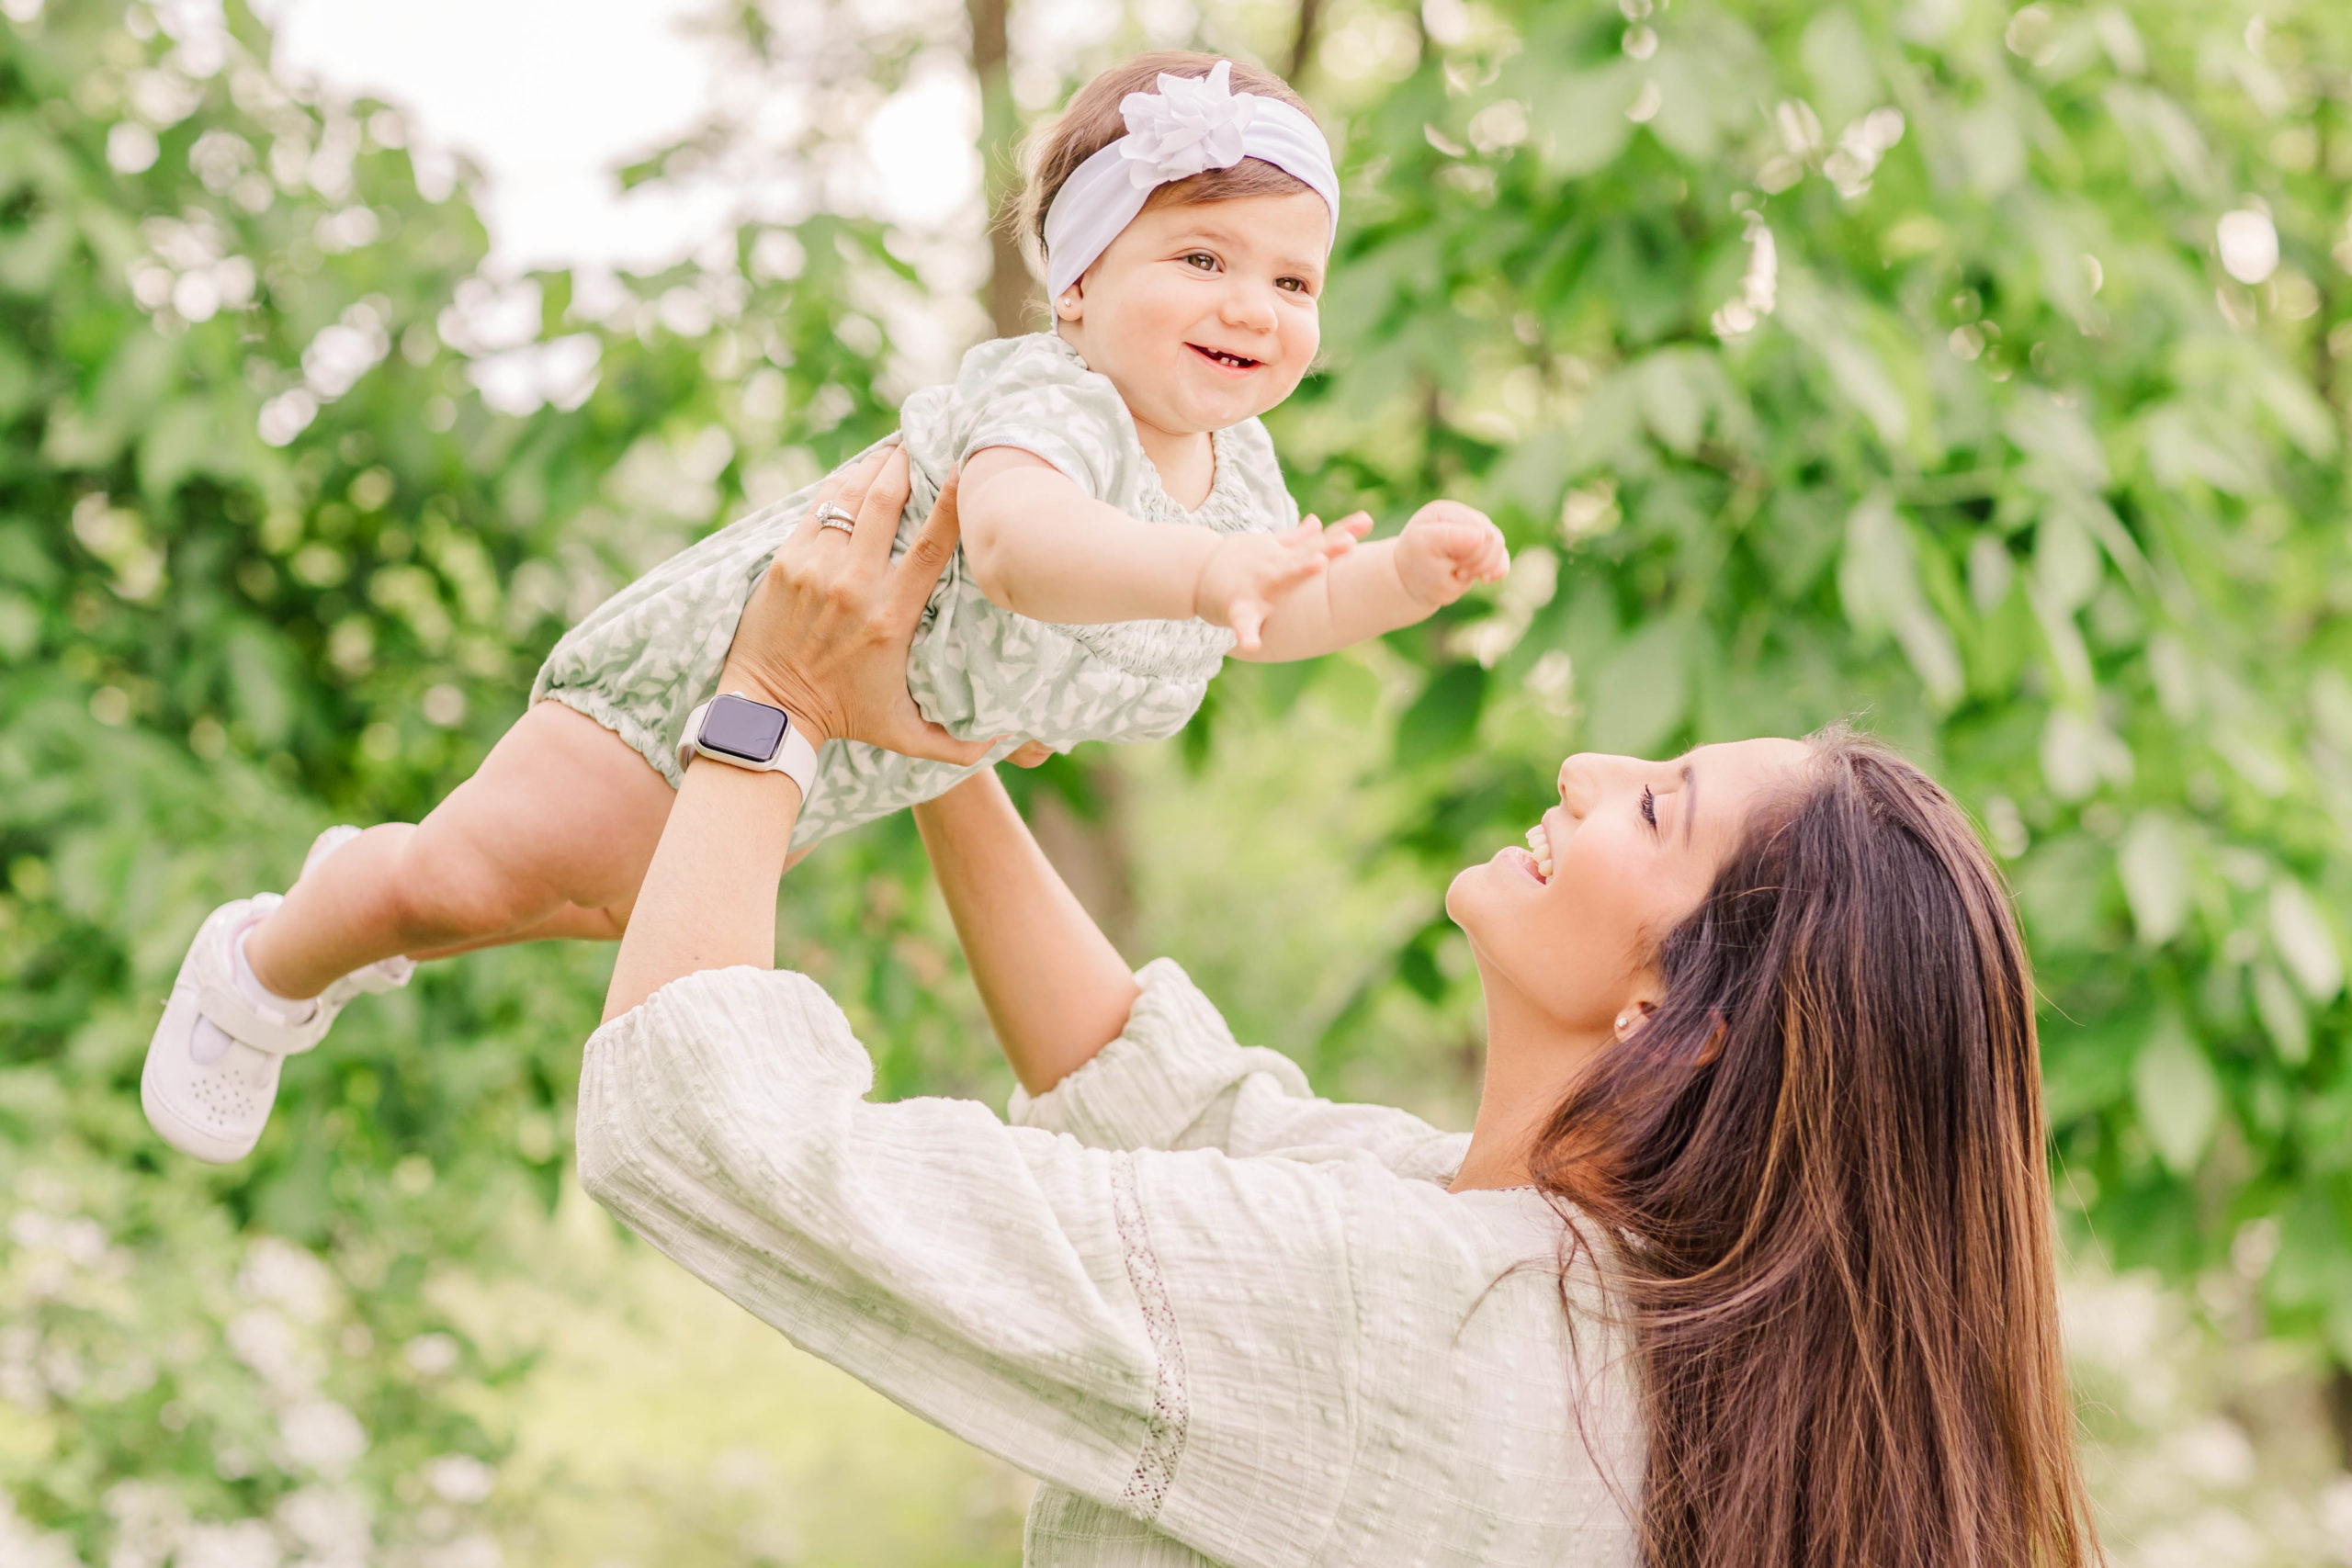 A little girl lifted up against the beautiful airy green foliage, at this mommy and me session.